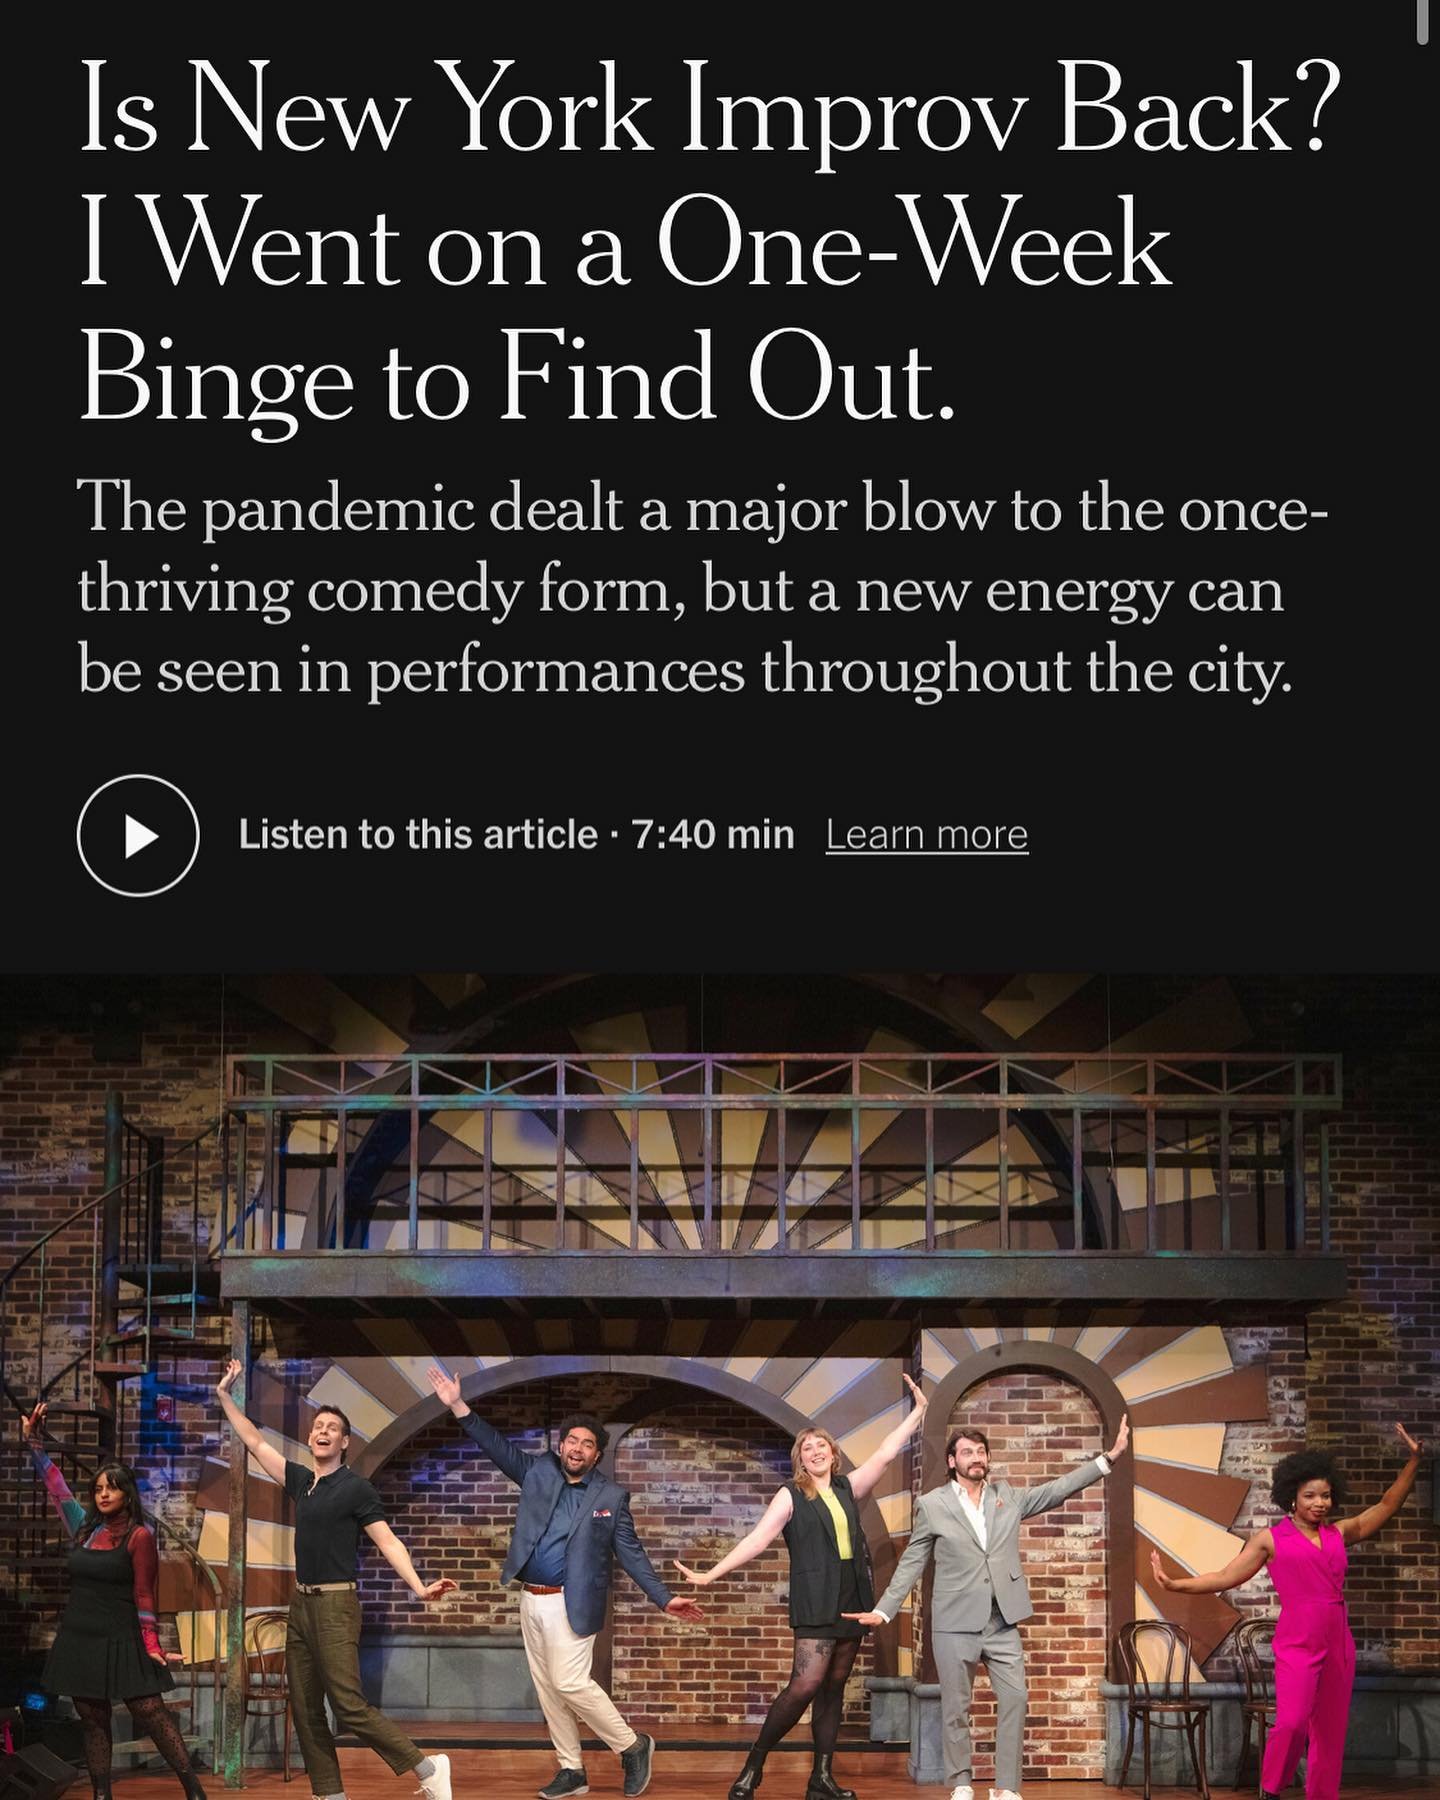 New York Improv is back and better than ever! Thanks to @zinomanj of the @nytimes for covering the return of New York Improv! We are honored to be mentioned alongside some of New York's finest comedy institutions! Live, laugh, love! 😍😍😍😍🎤🎤🎤